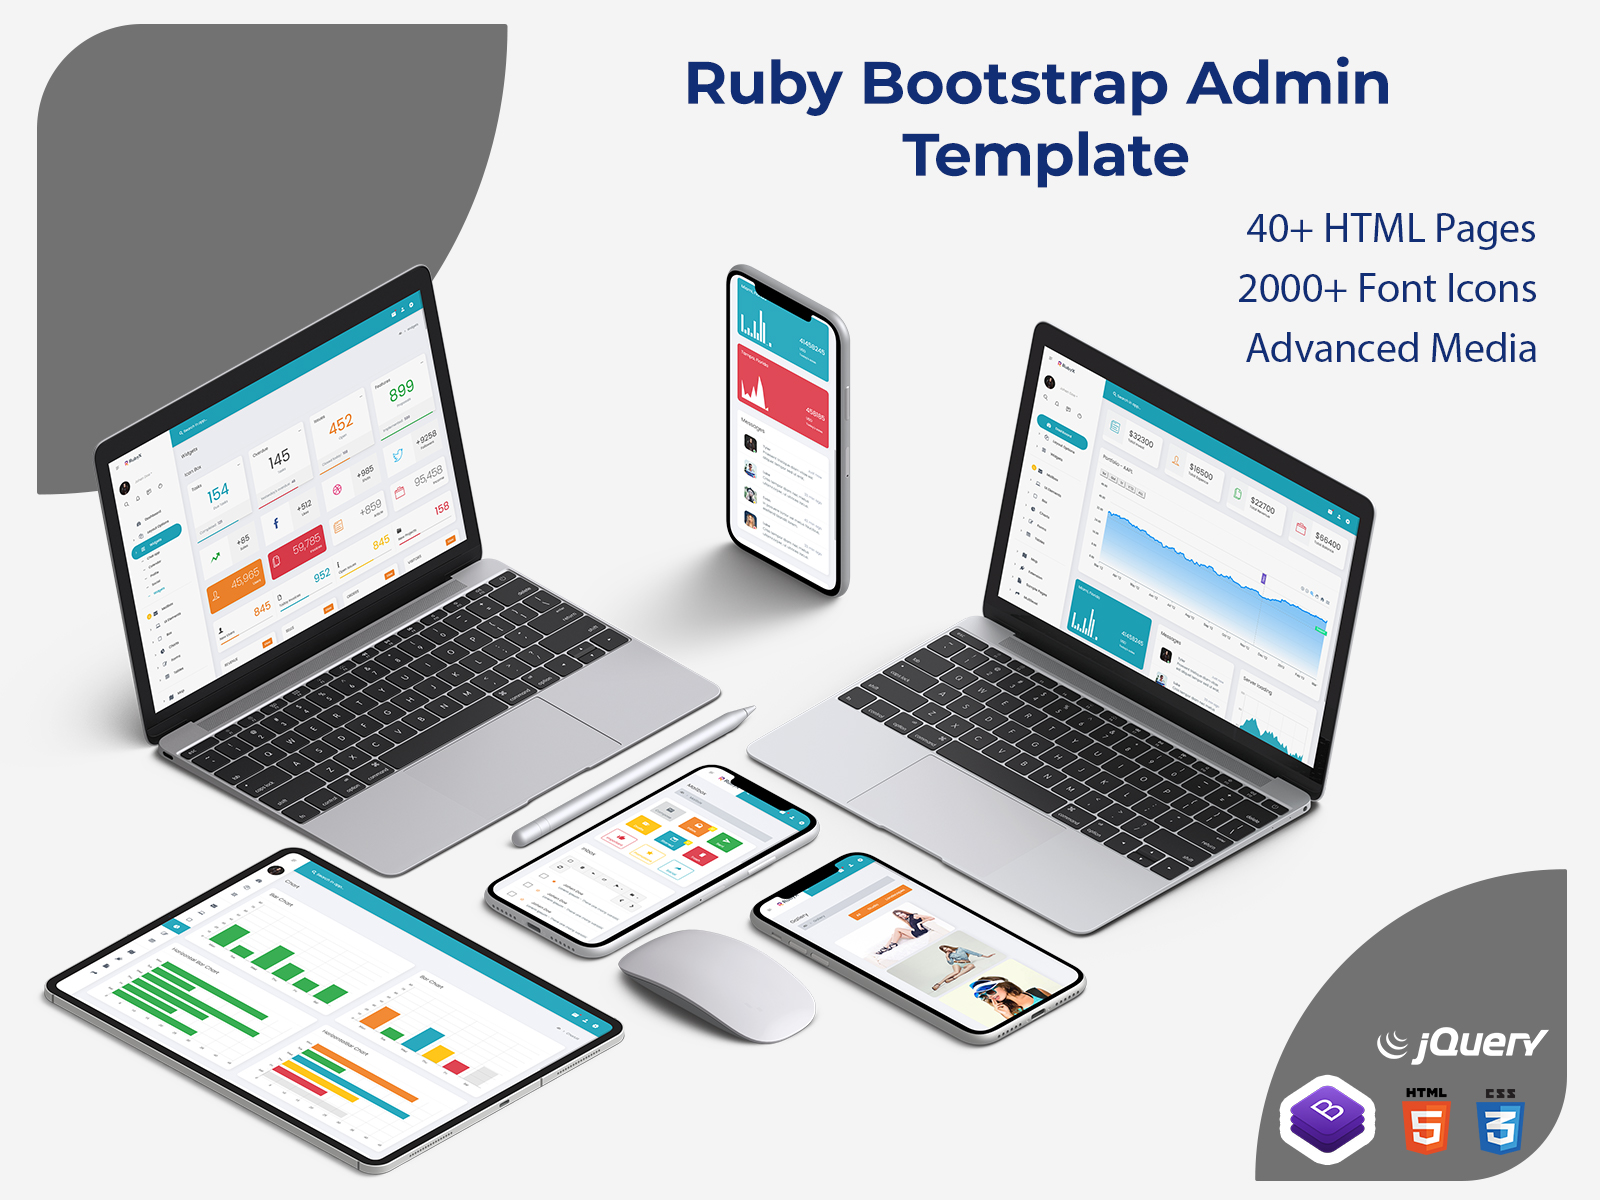 Bootstrap Admin Template & Responsive Web Application Kit-  Ruby